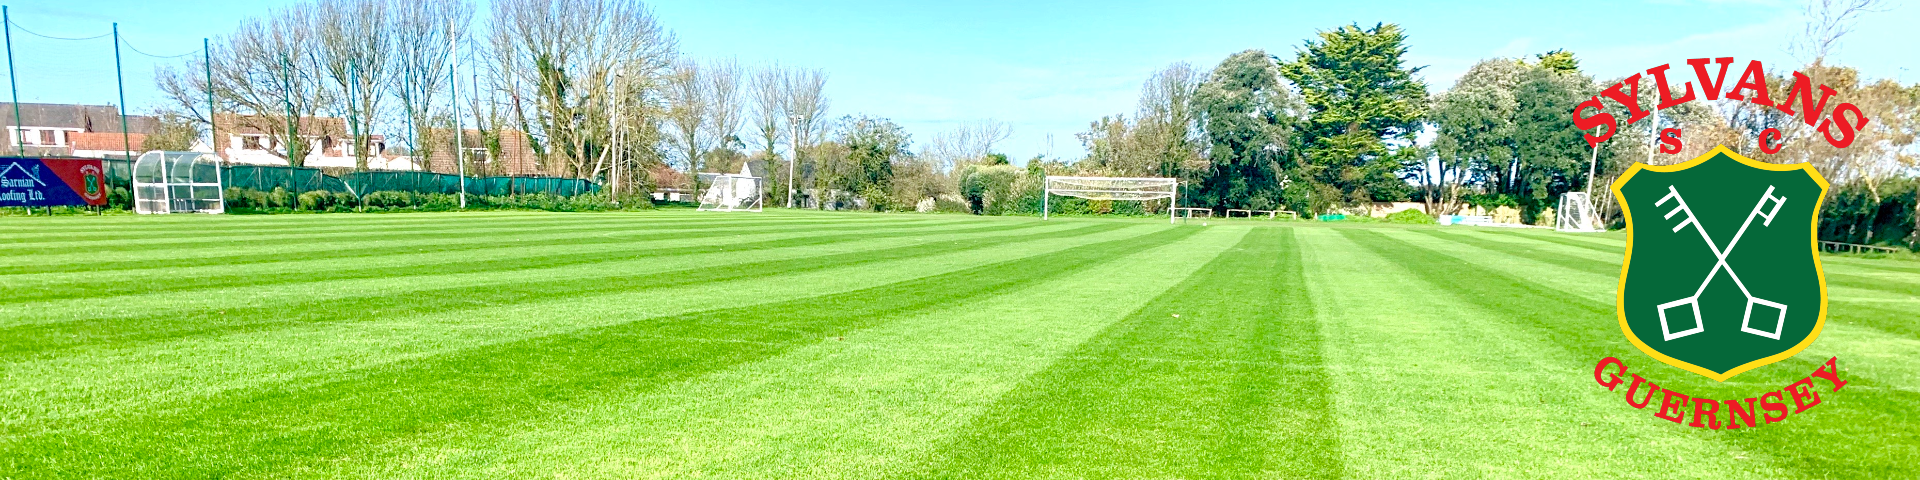 SYLVANS SPORTS CLUB GUERNSEY |    founded 1922    #100years